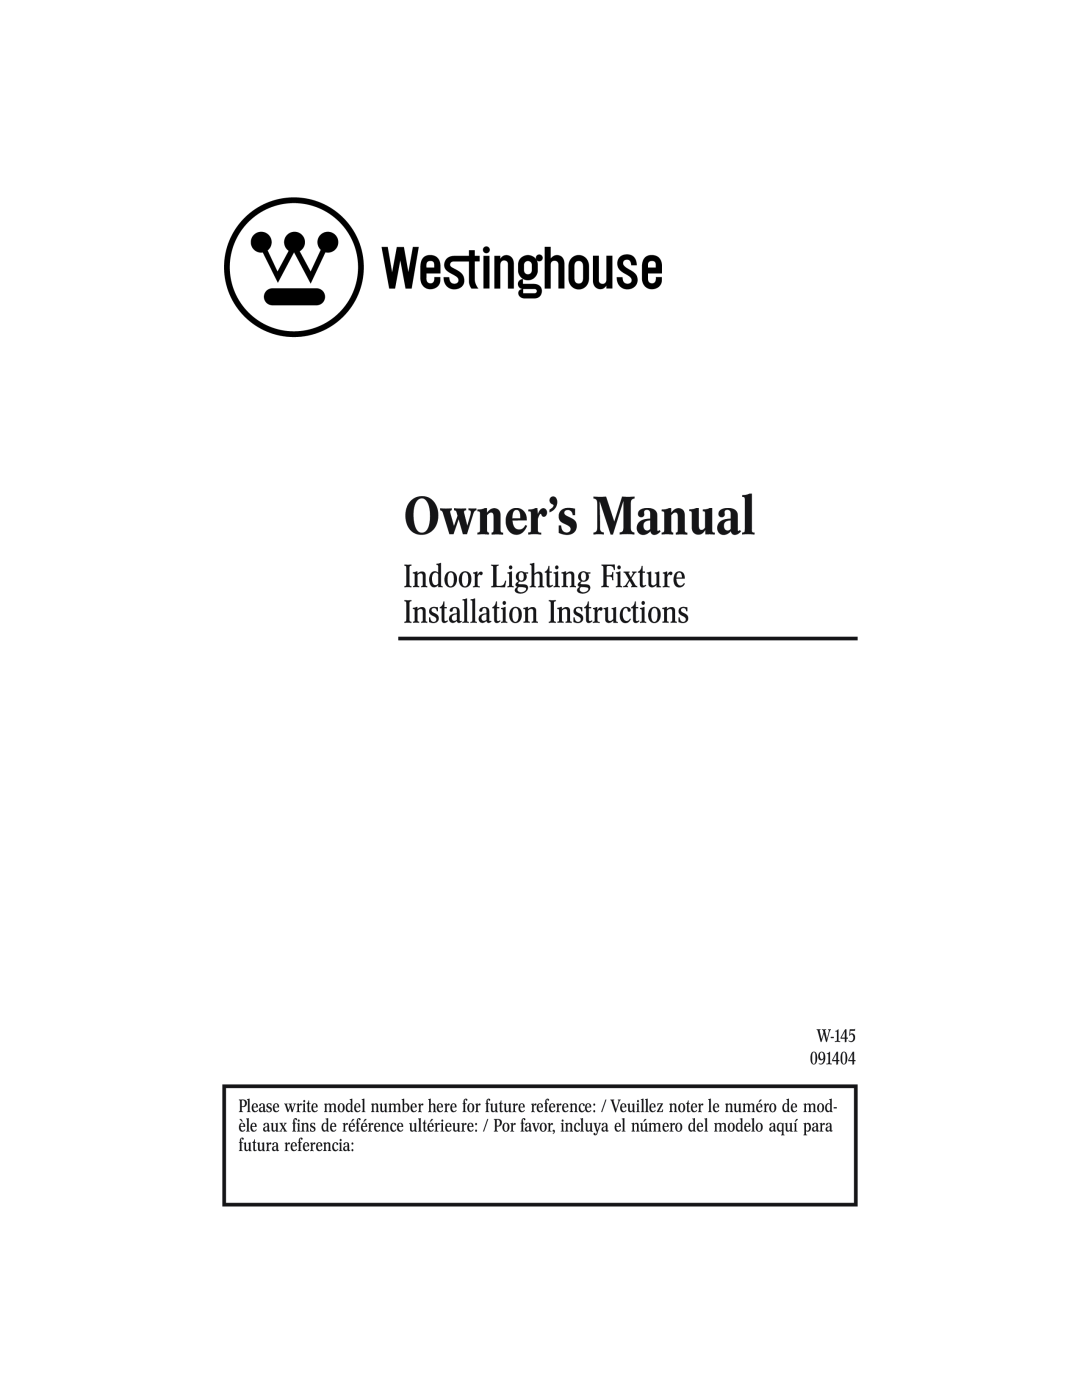 Westinghouse W-145 owner manual Indoor Lighting Fixture Installation Instructions 